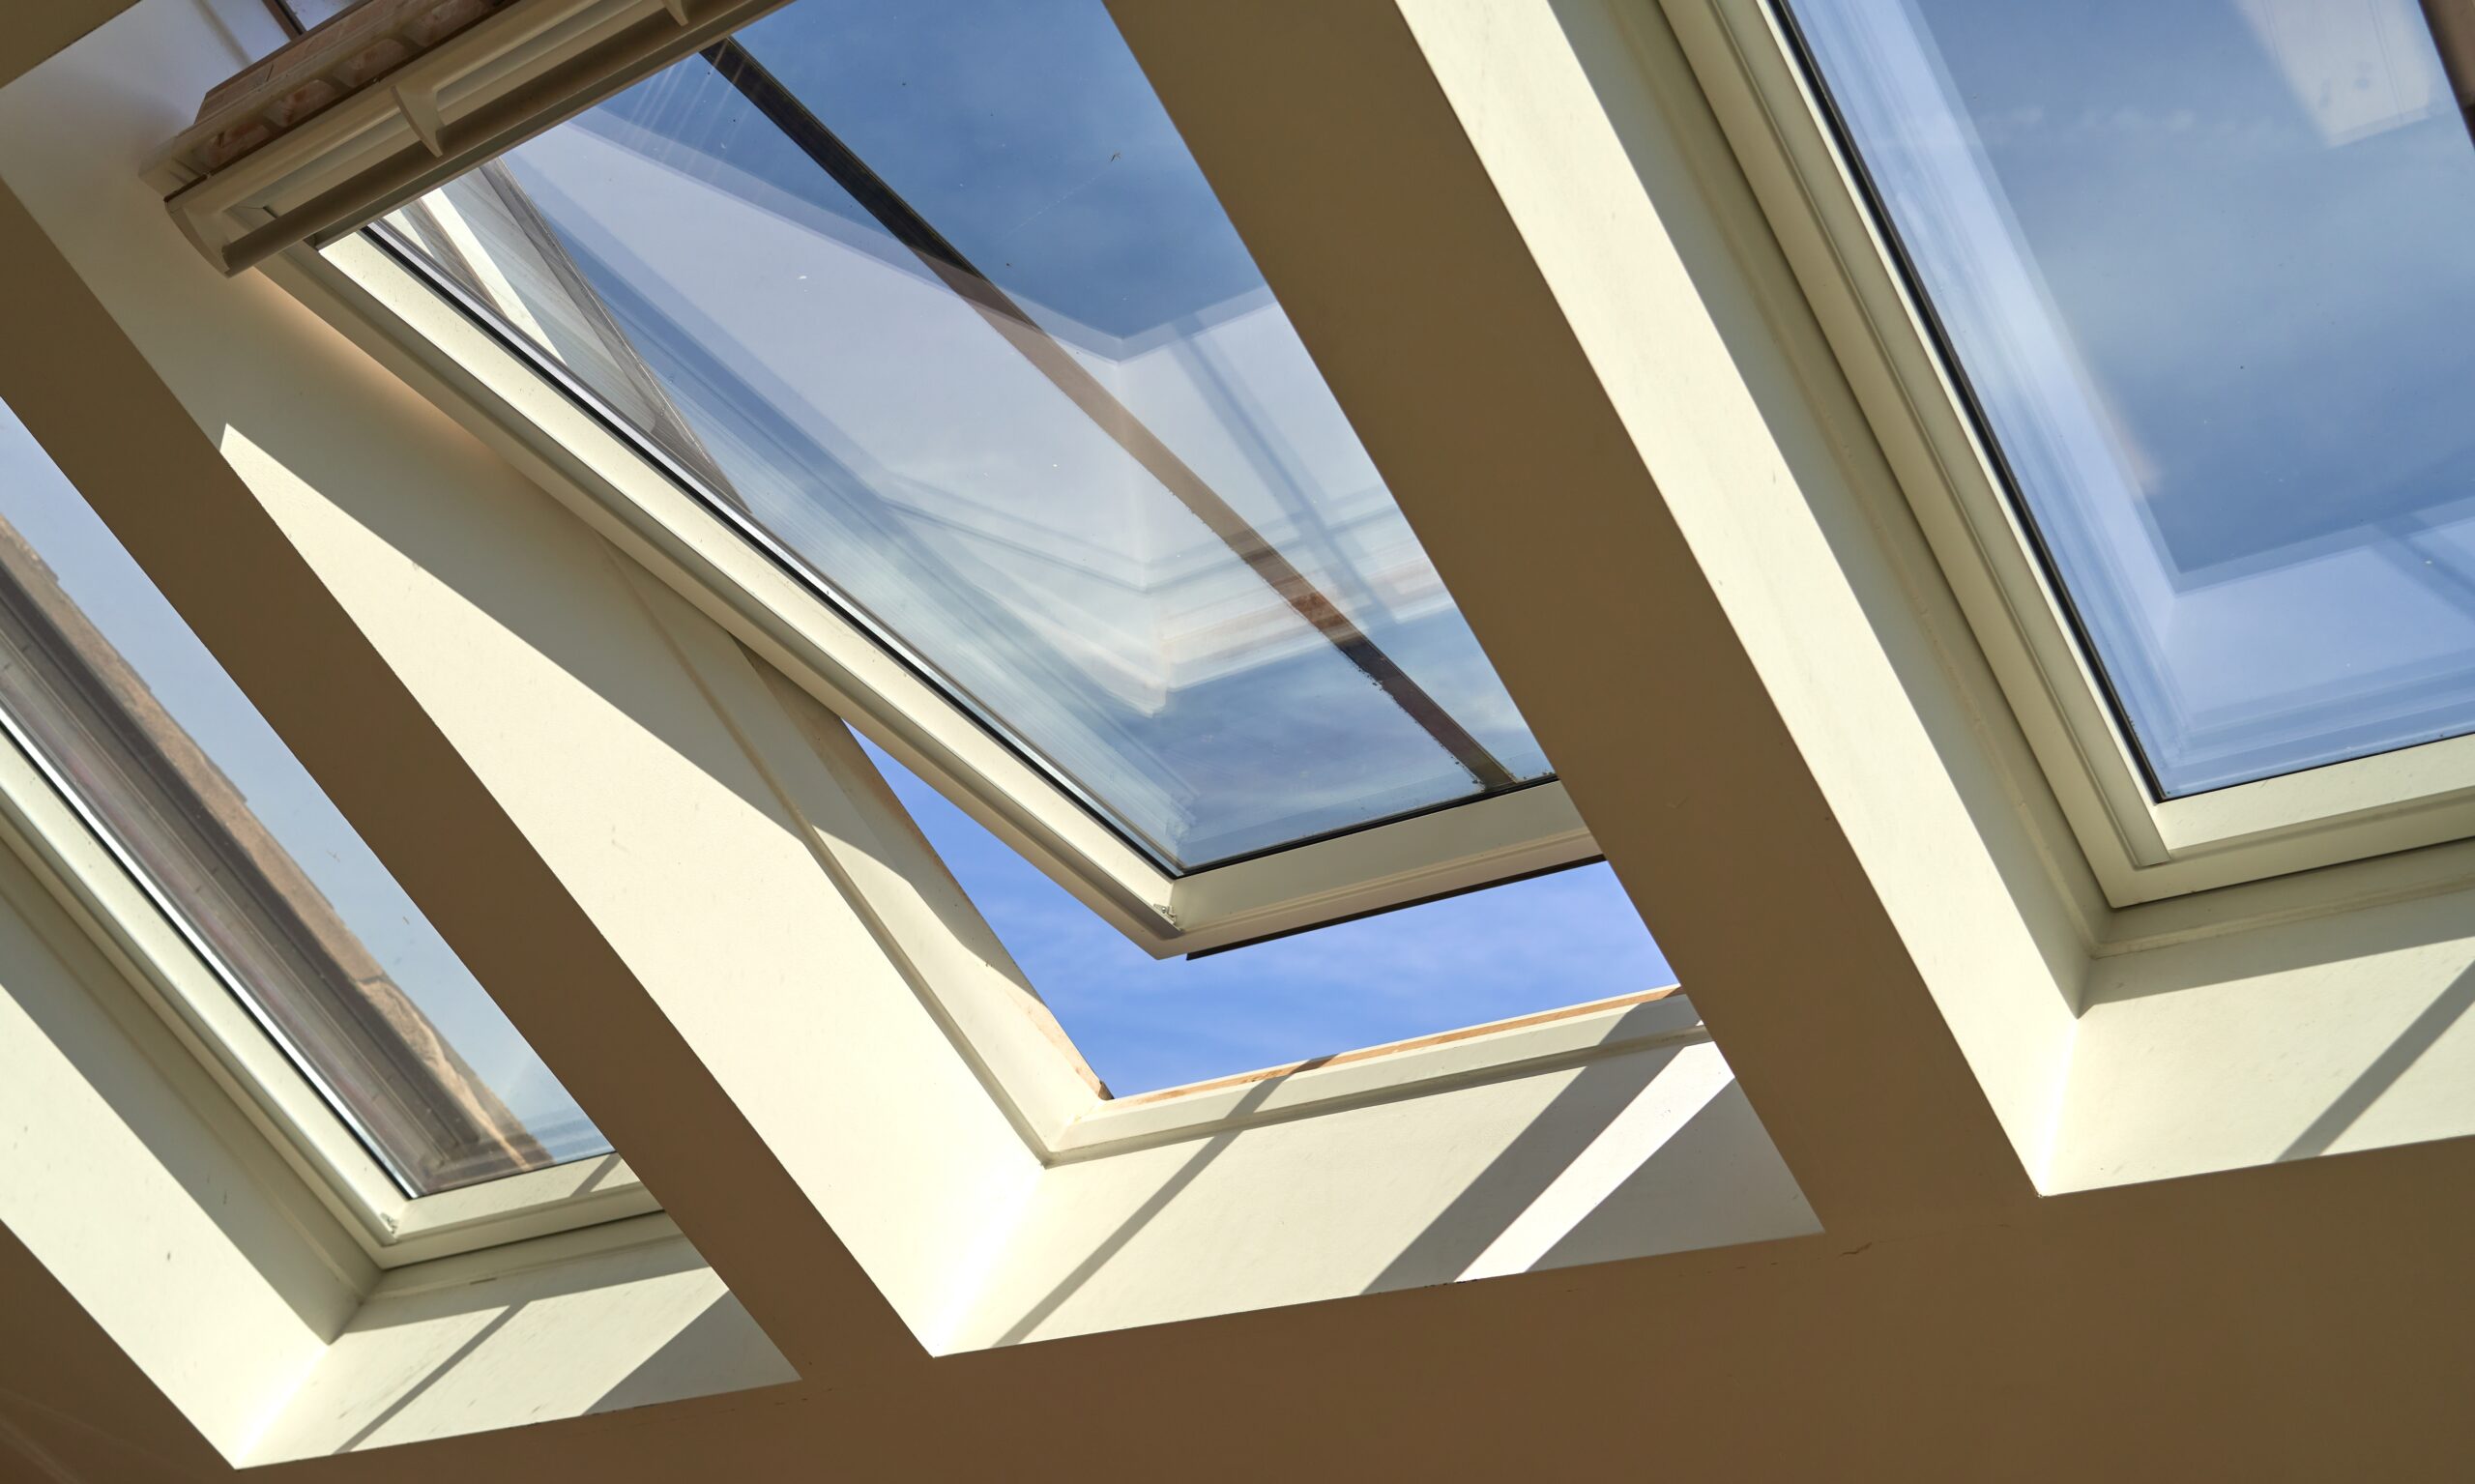 Are Electric Roof Windows Energy Efficient?